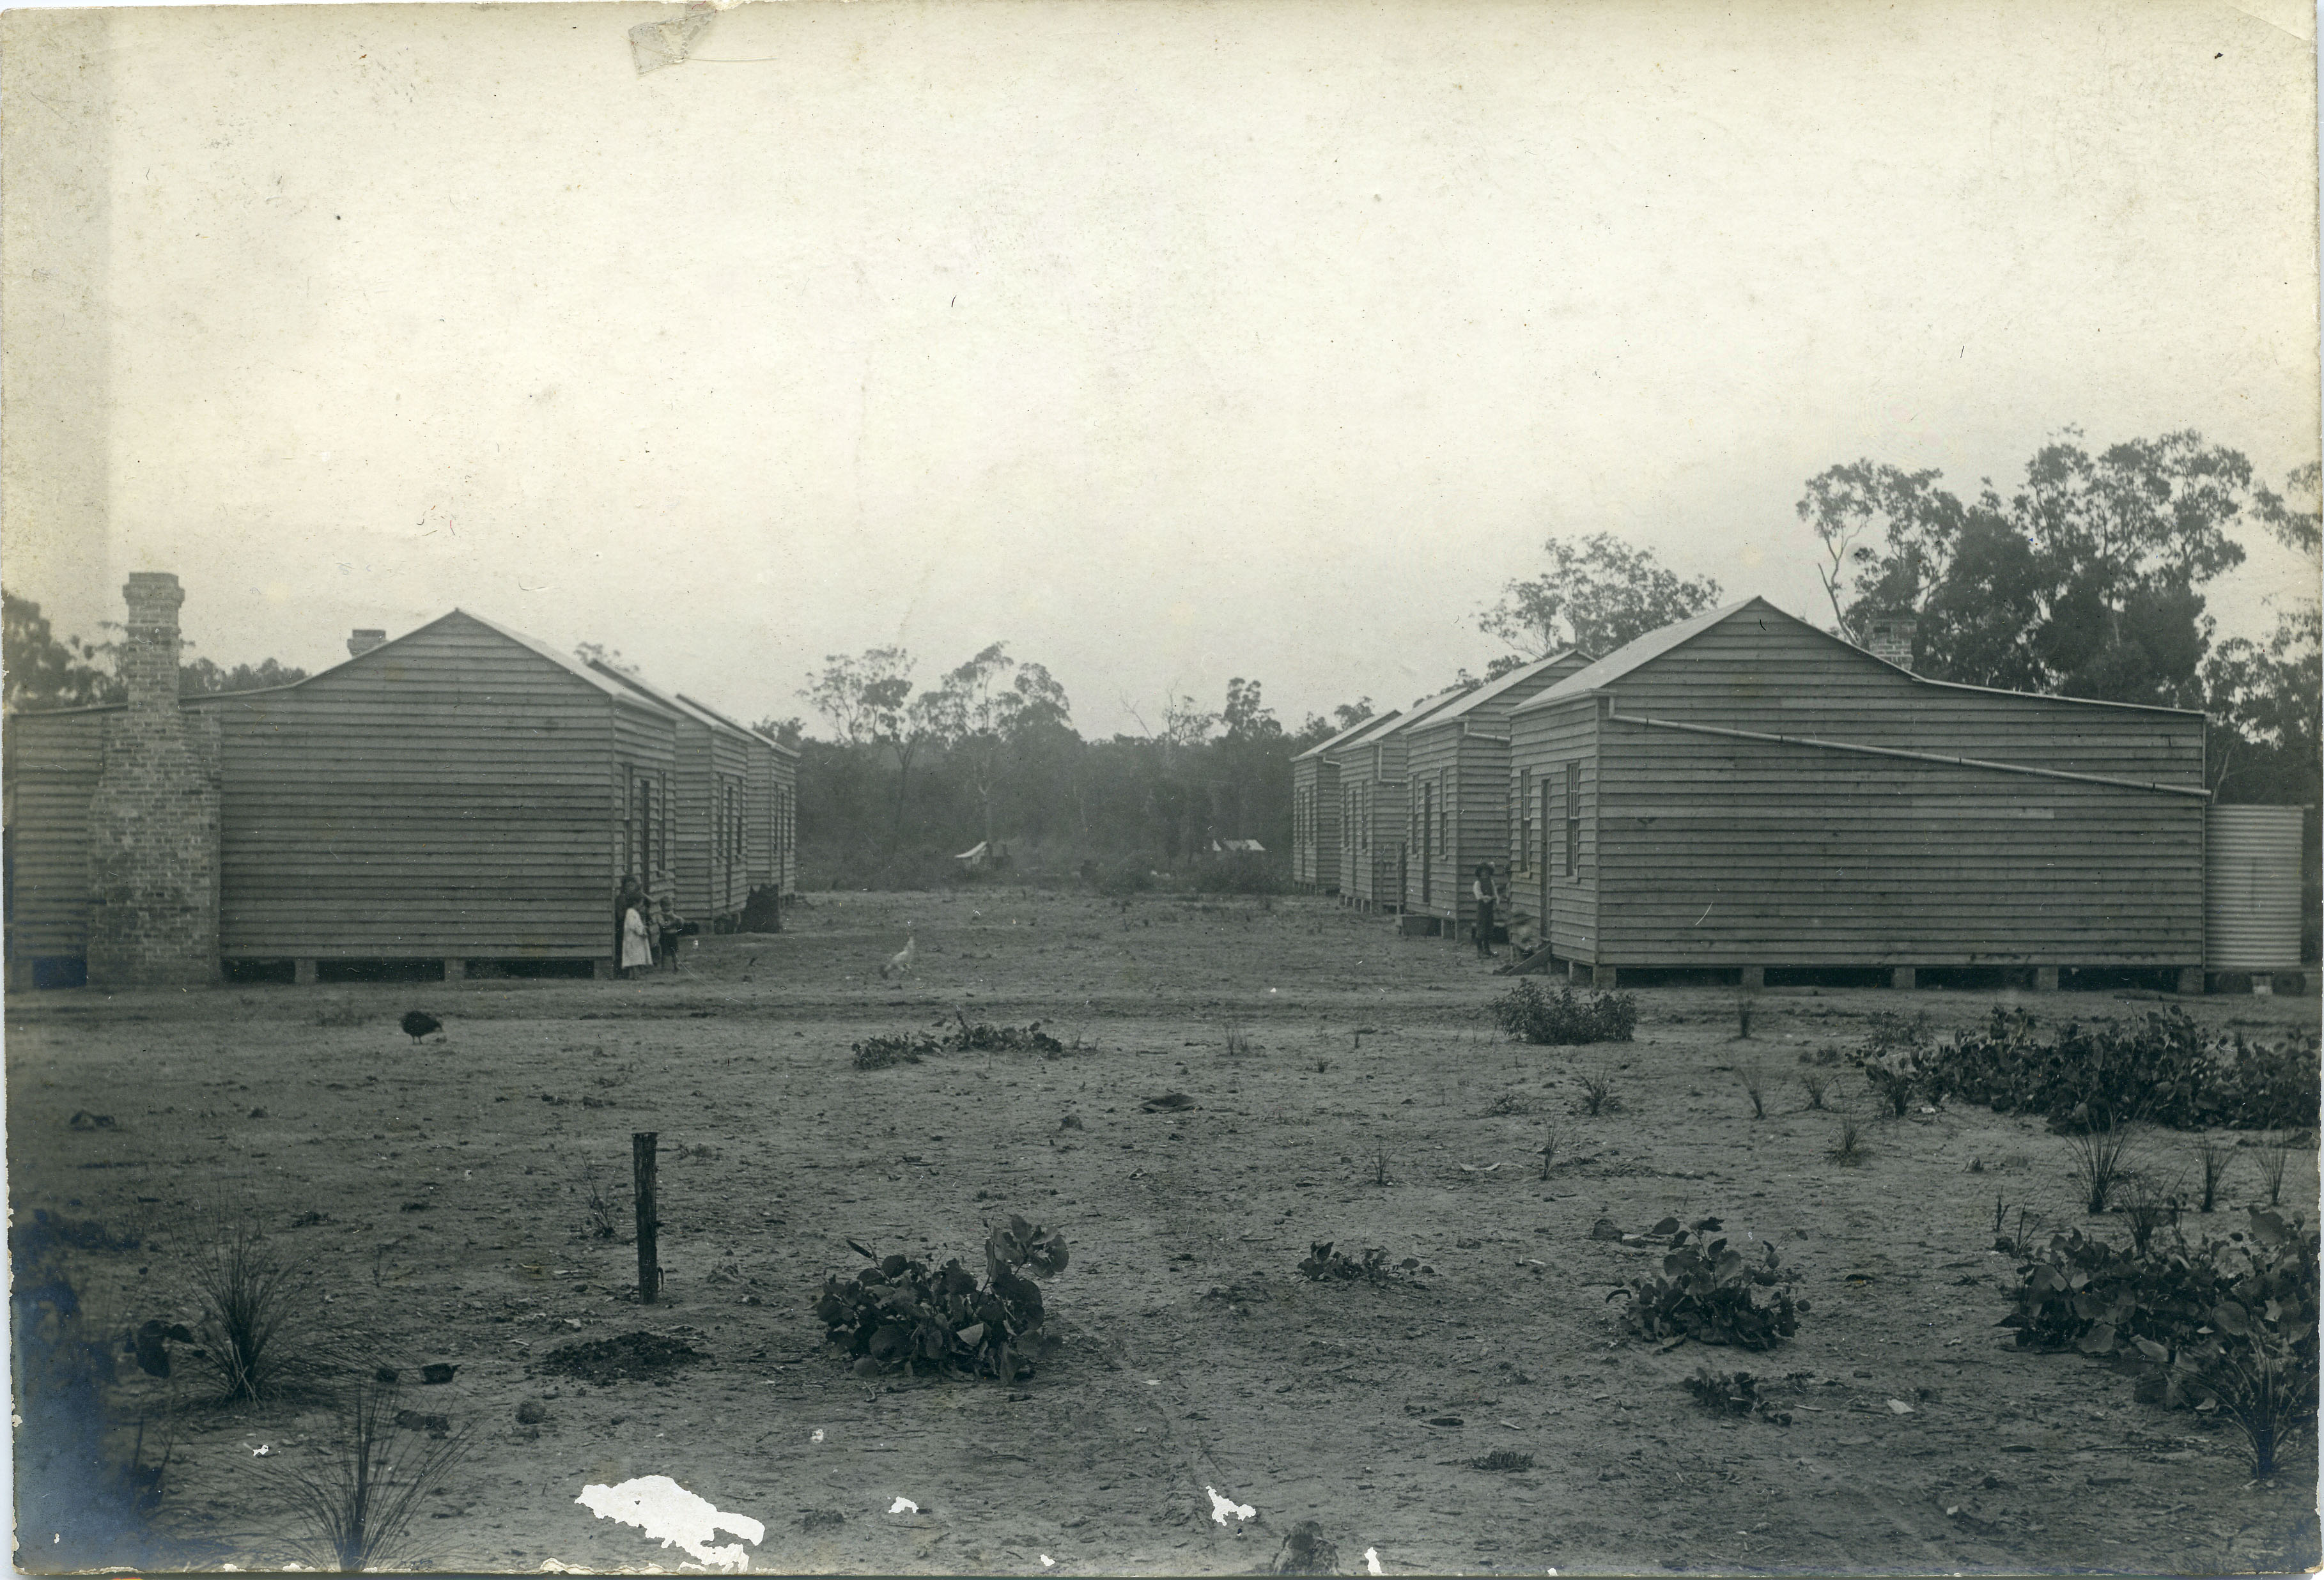 Miners' cottages at Hebburn Colliery, Newcastle, New South Wales, c. 1902 (K0029; 1-460-31).